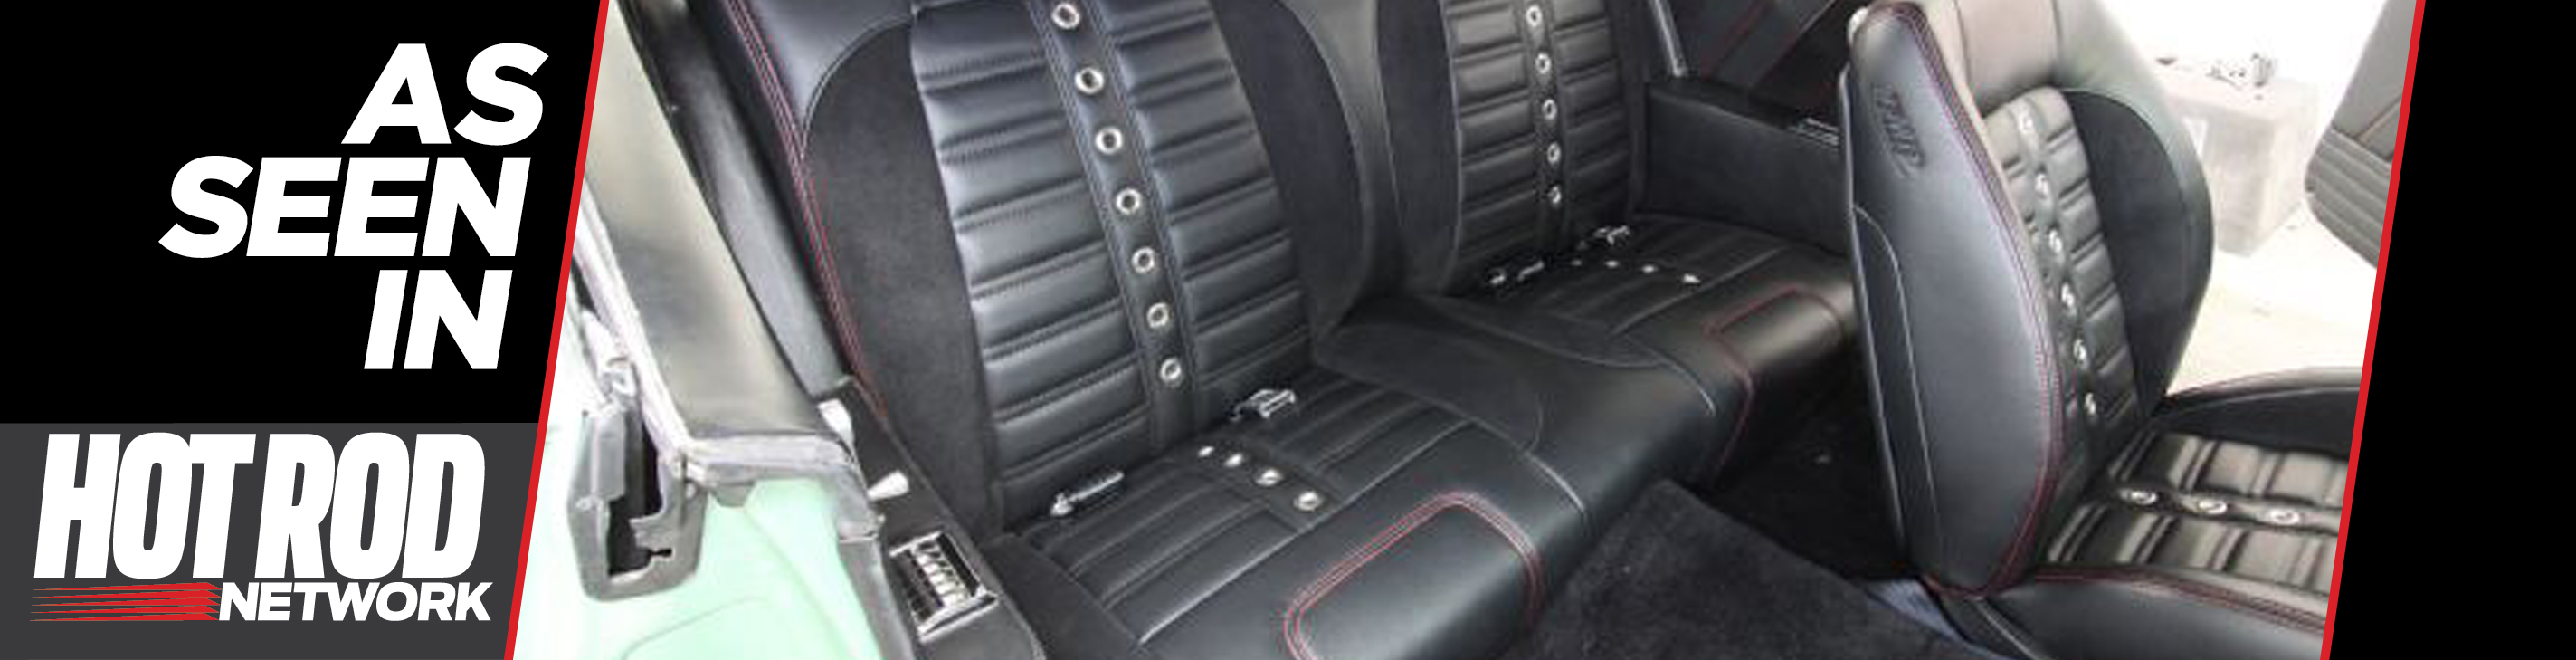 TMI's New Interior Kits Offer Custom Looks at a Wallet Friendly Price